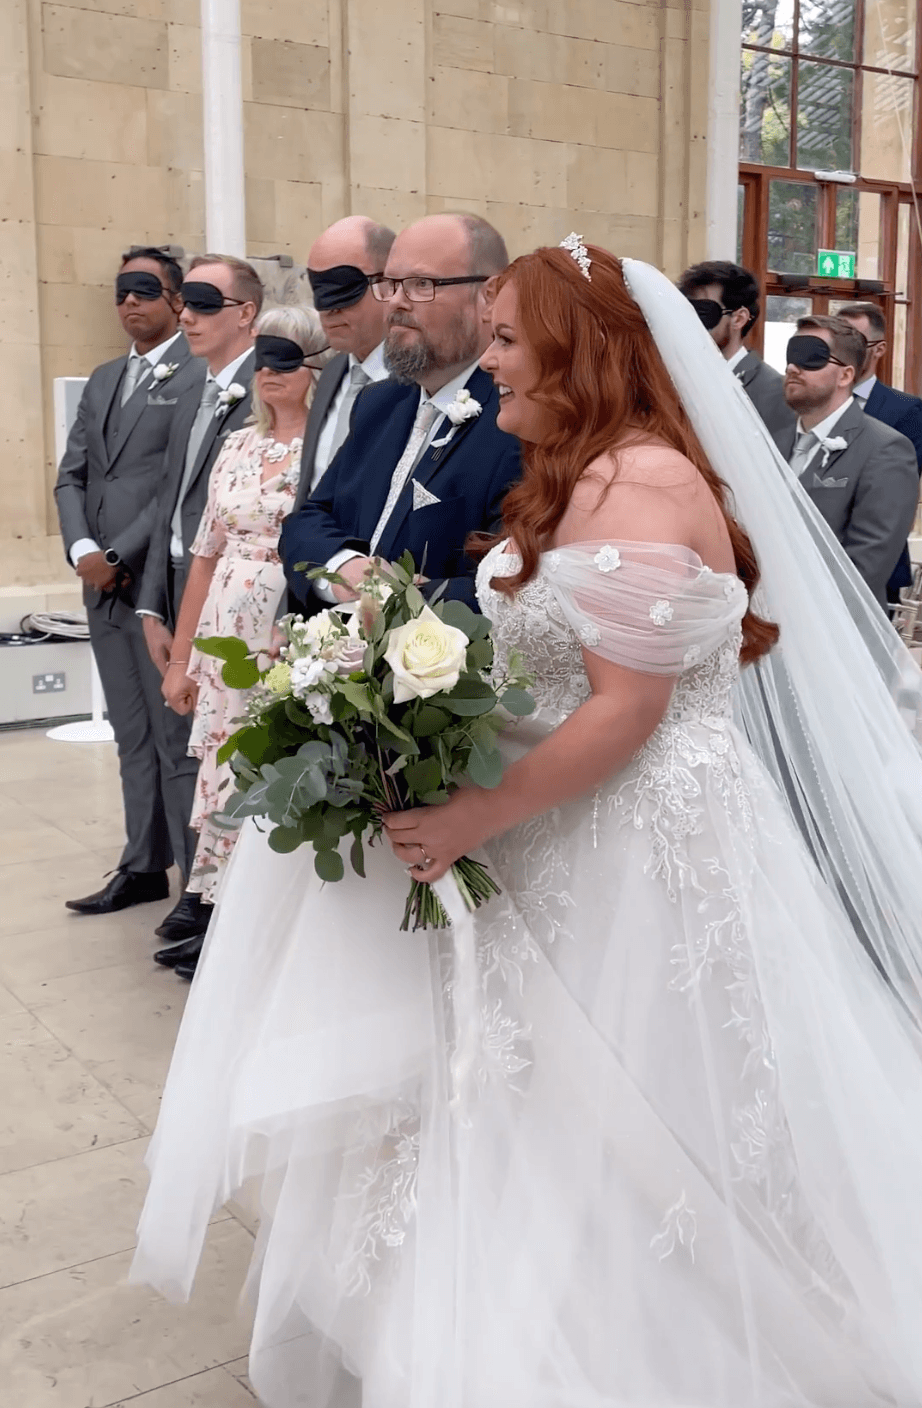 The bride had all her guests, including the groom, blindfolded for a special experience. (Courtesy of <a href="https://www.instagram.com/theweddingguy__/">Adam Stewart</a>)